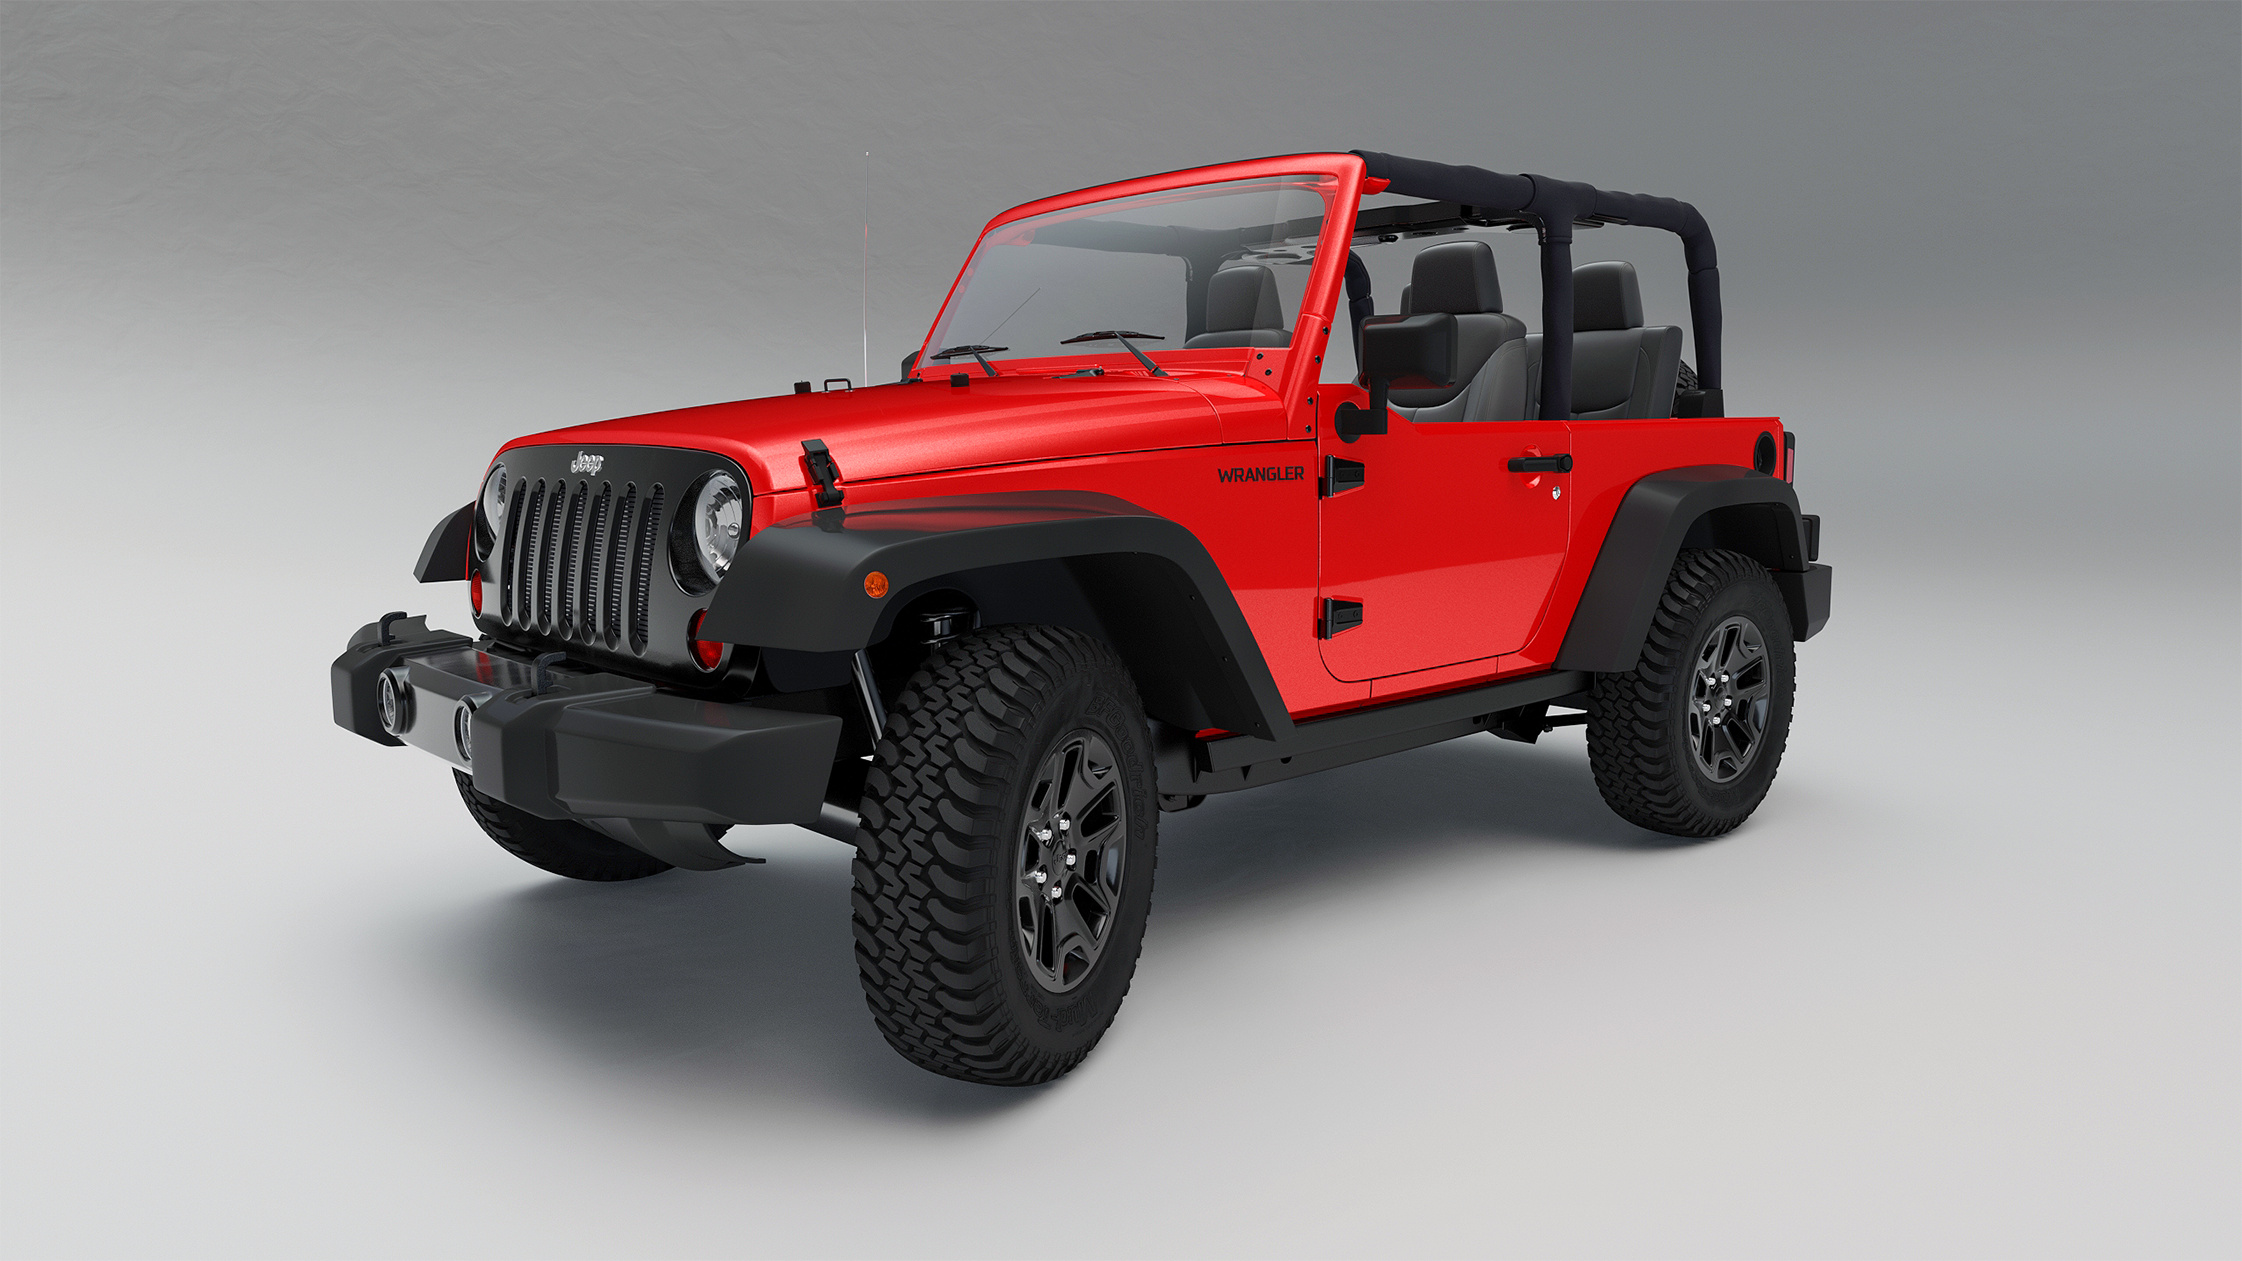 Jeep Wrangler - Finished Projects - Blender Artists Community